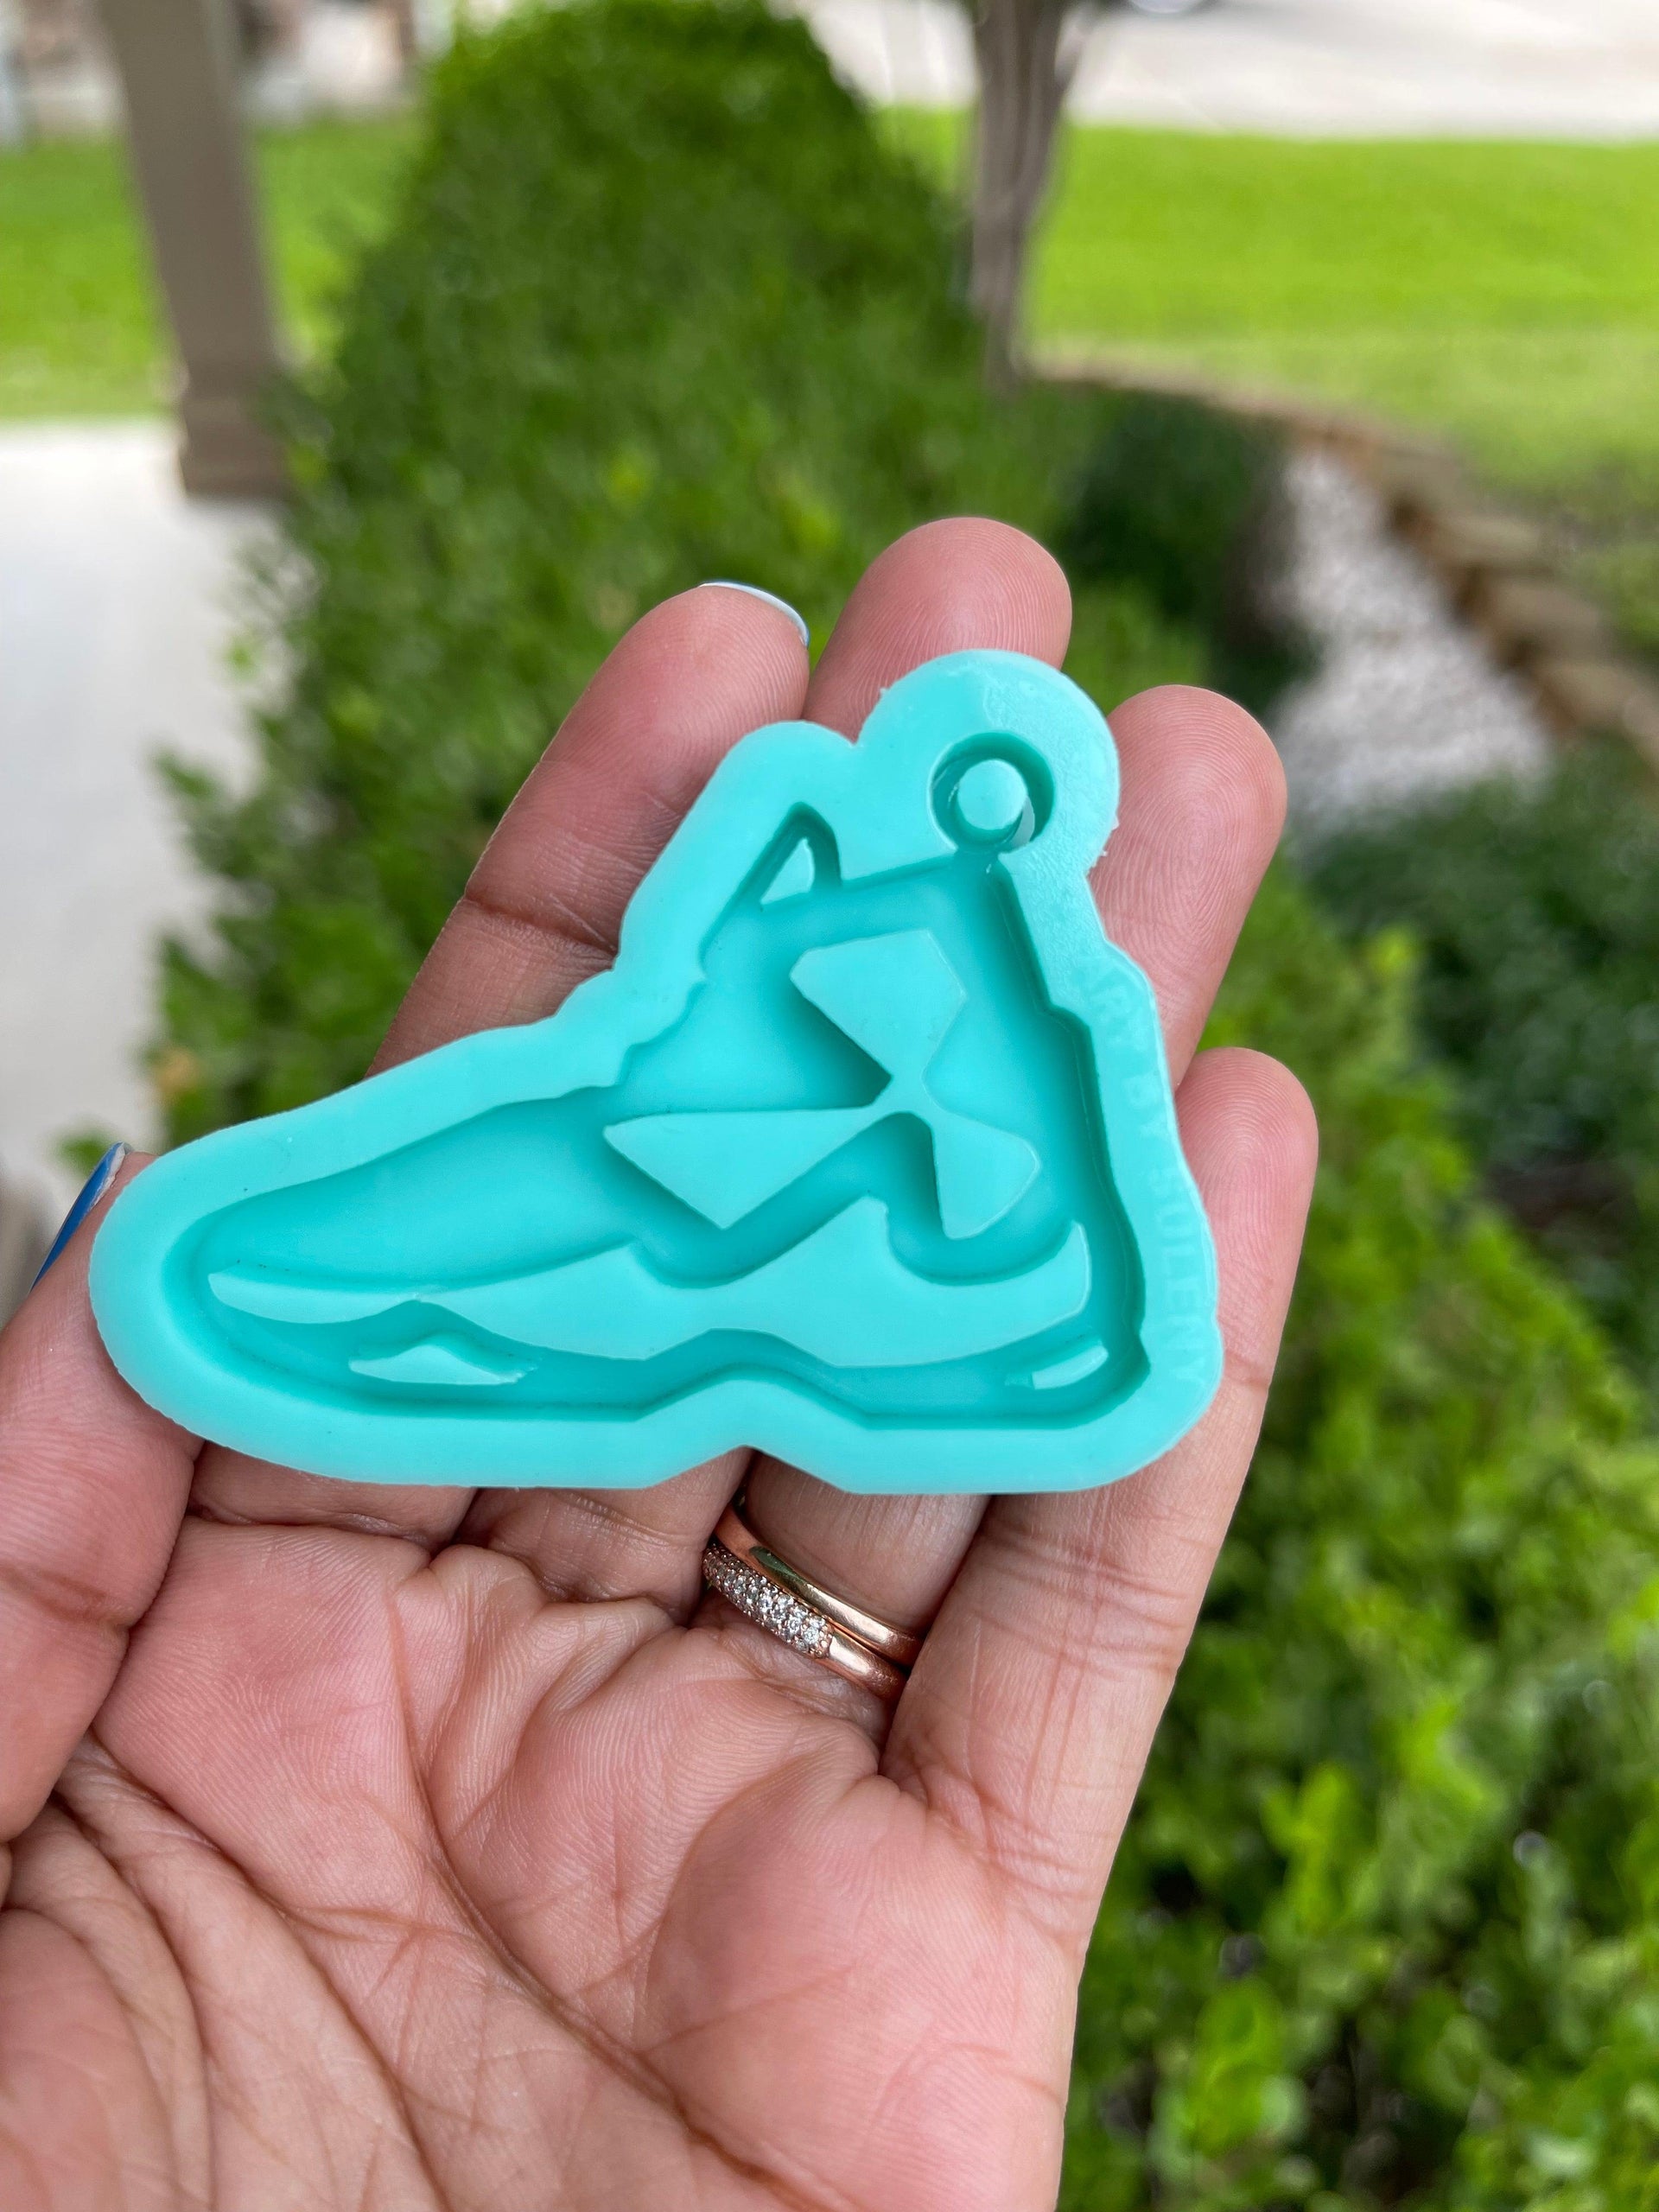 Shoes Keychain Mold - Sport Mold for Resin - Basketball Shoes Mold - NBA Shoes Mold - Keychain mold - Silicone Mold for Epoxy Resin - Art By Suleny Craft Store LLC